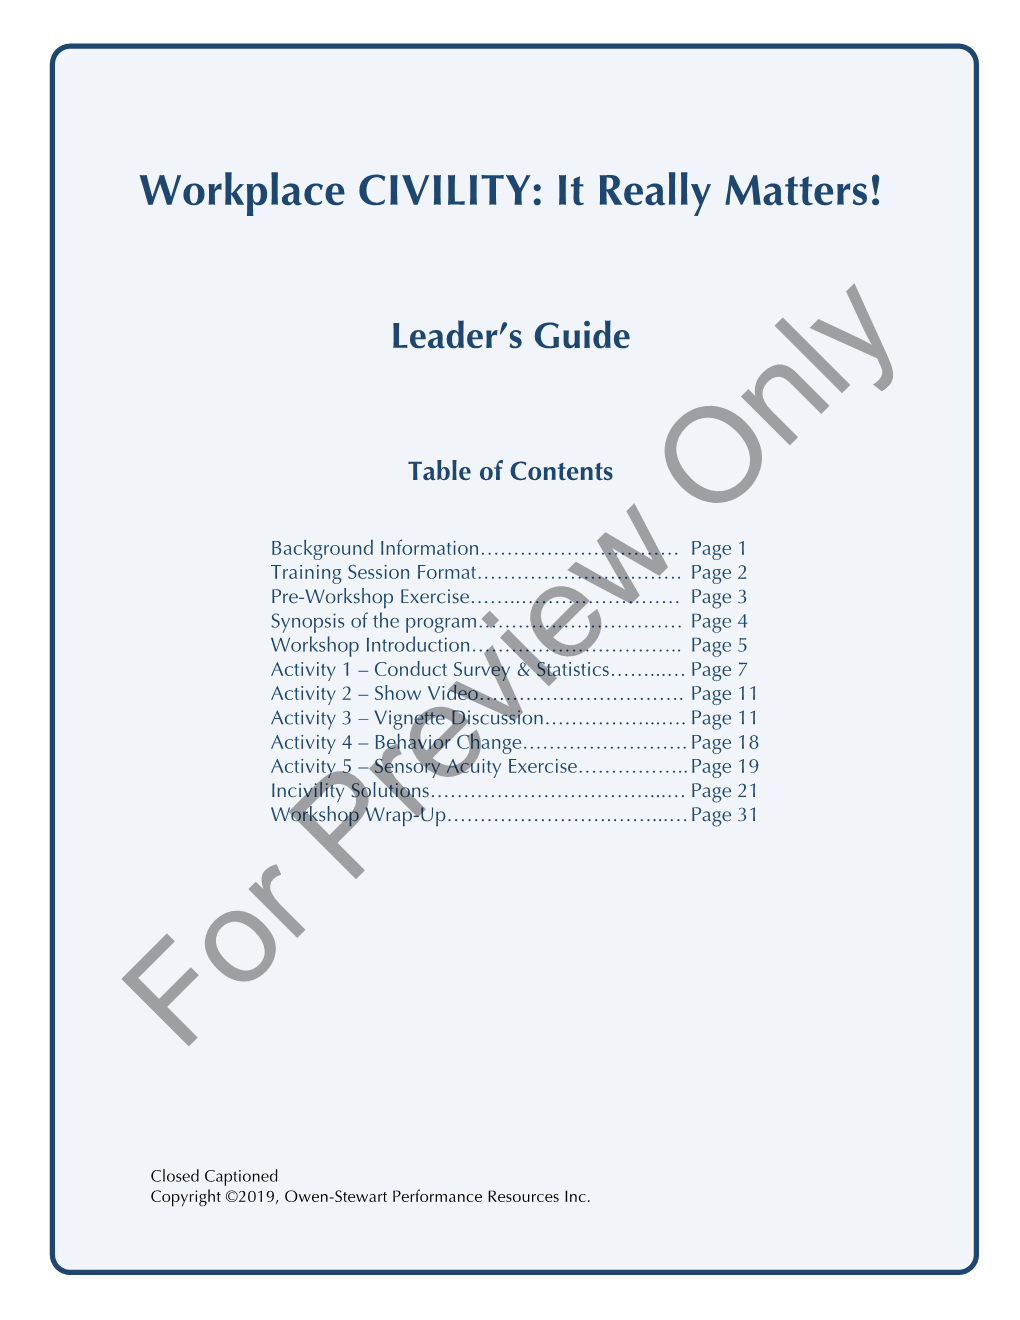 Workplace Civility Leader's Guide